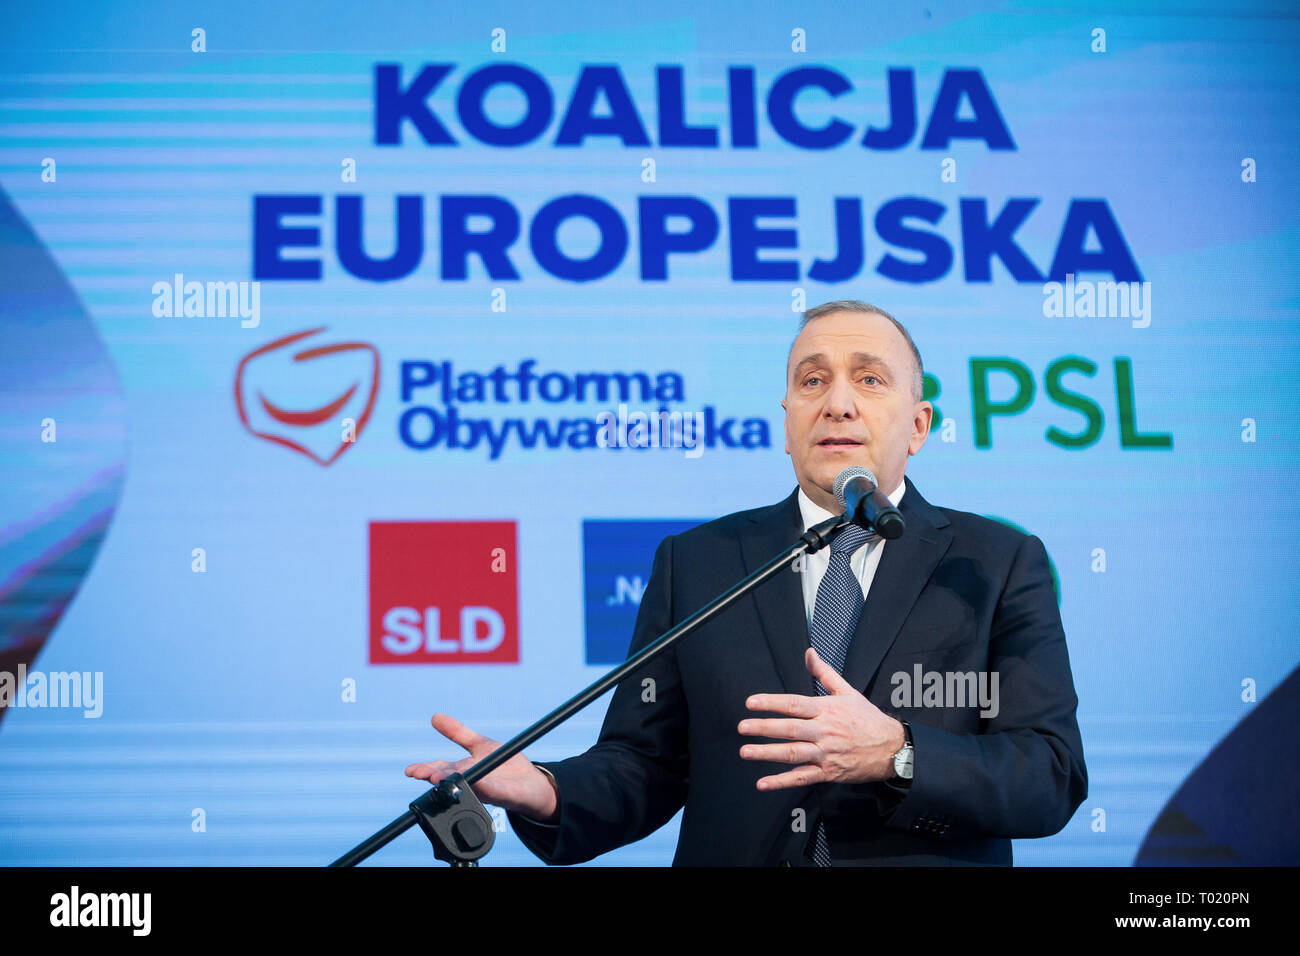 Grzegorz Schetyna during a joint press conference of the ''European Coalition'' (five polish largest opposition parties) leaders in Warsaw, Poland on 24 February 2019. Five Polish opposition parties (Civic Platform, Modern party, Polish Peoples Party, Democratic Left Alliance and Polands Greens) on Sunday signed a coalition declaration, ahead of the upcoming European Parliament Elections, and created initiative billed as the European Coalition. Stock Photo